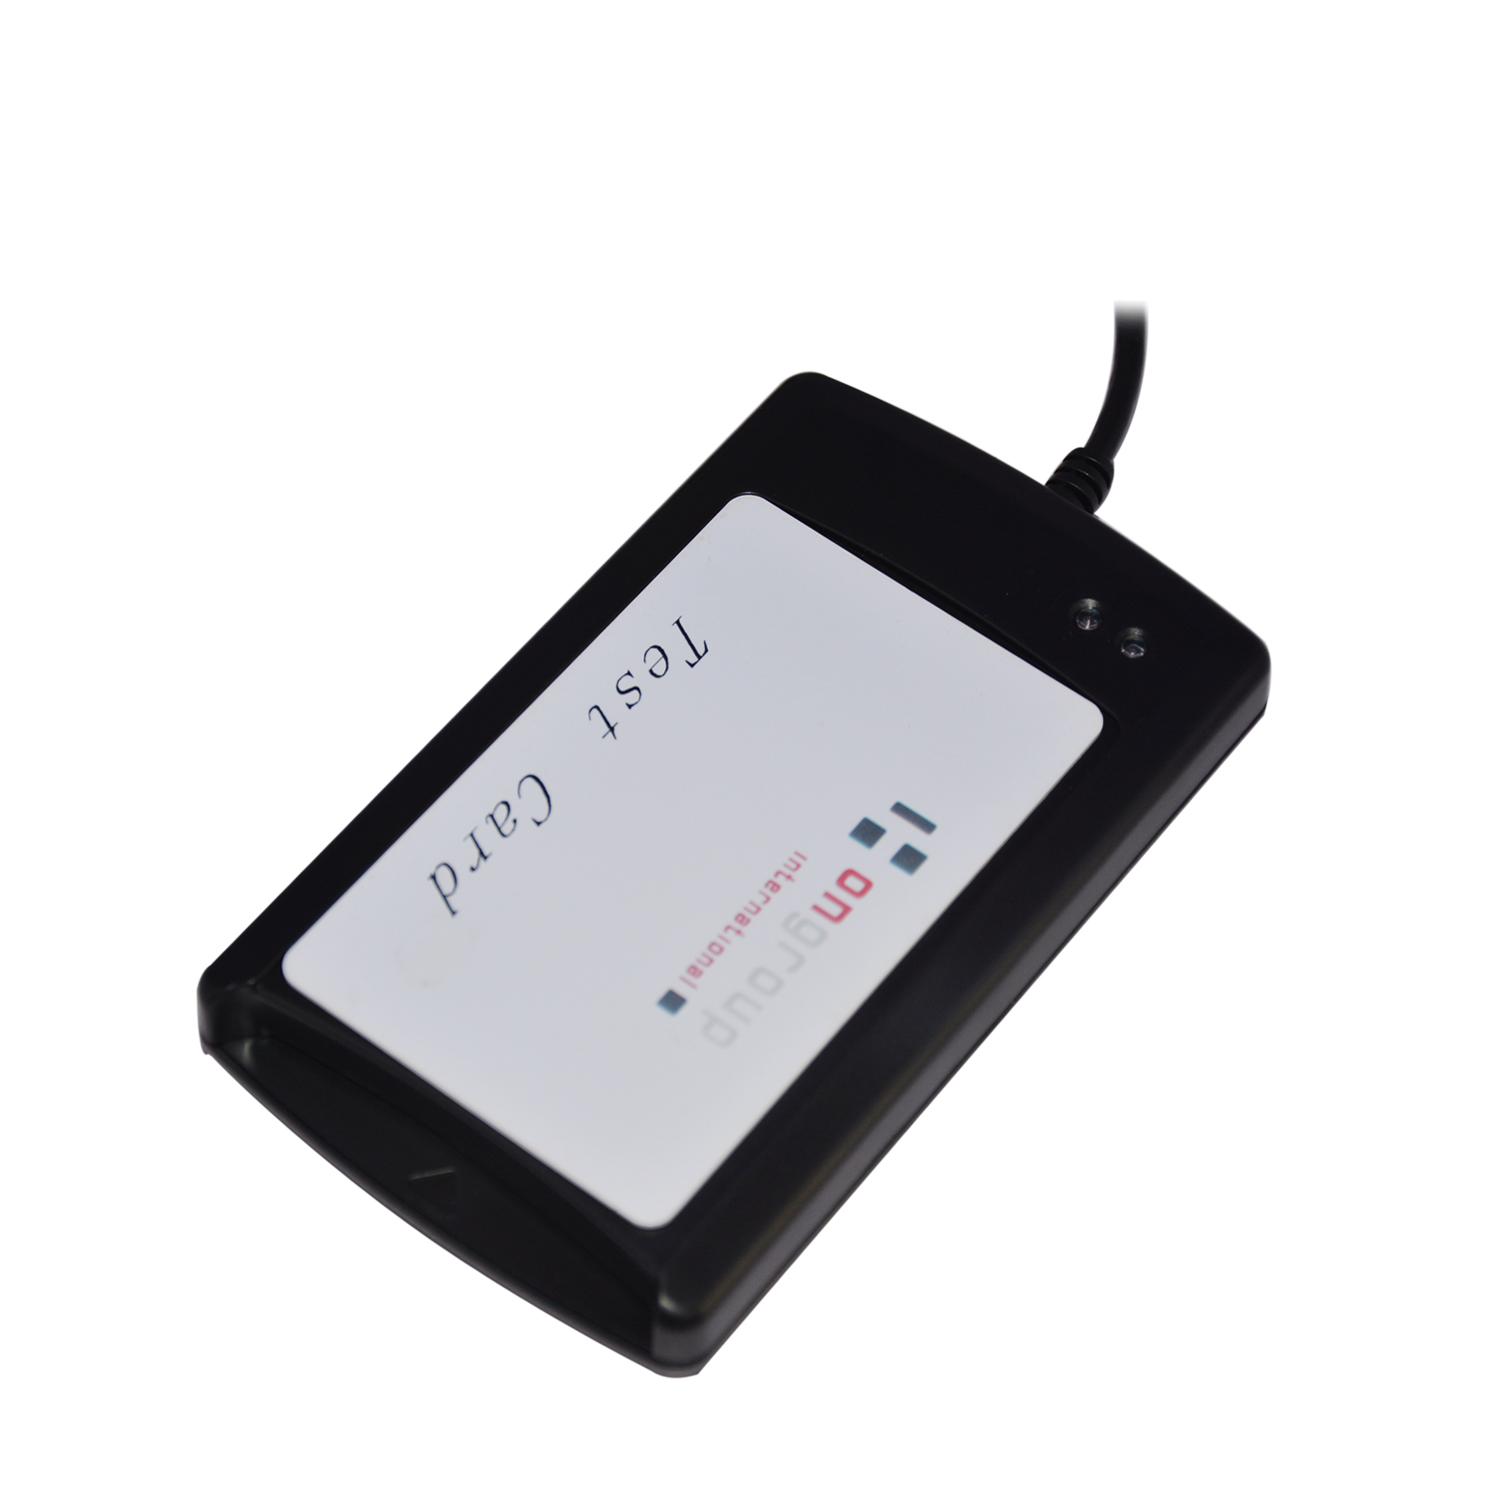 ISO14443 TypeA/B Dual Interface PC/SC Contactless Smart Card Reader ACR1281U-C1